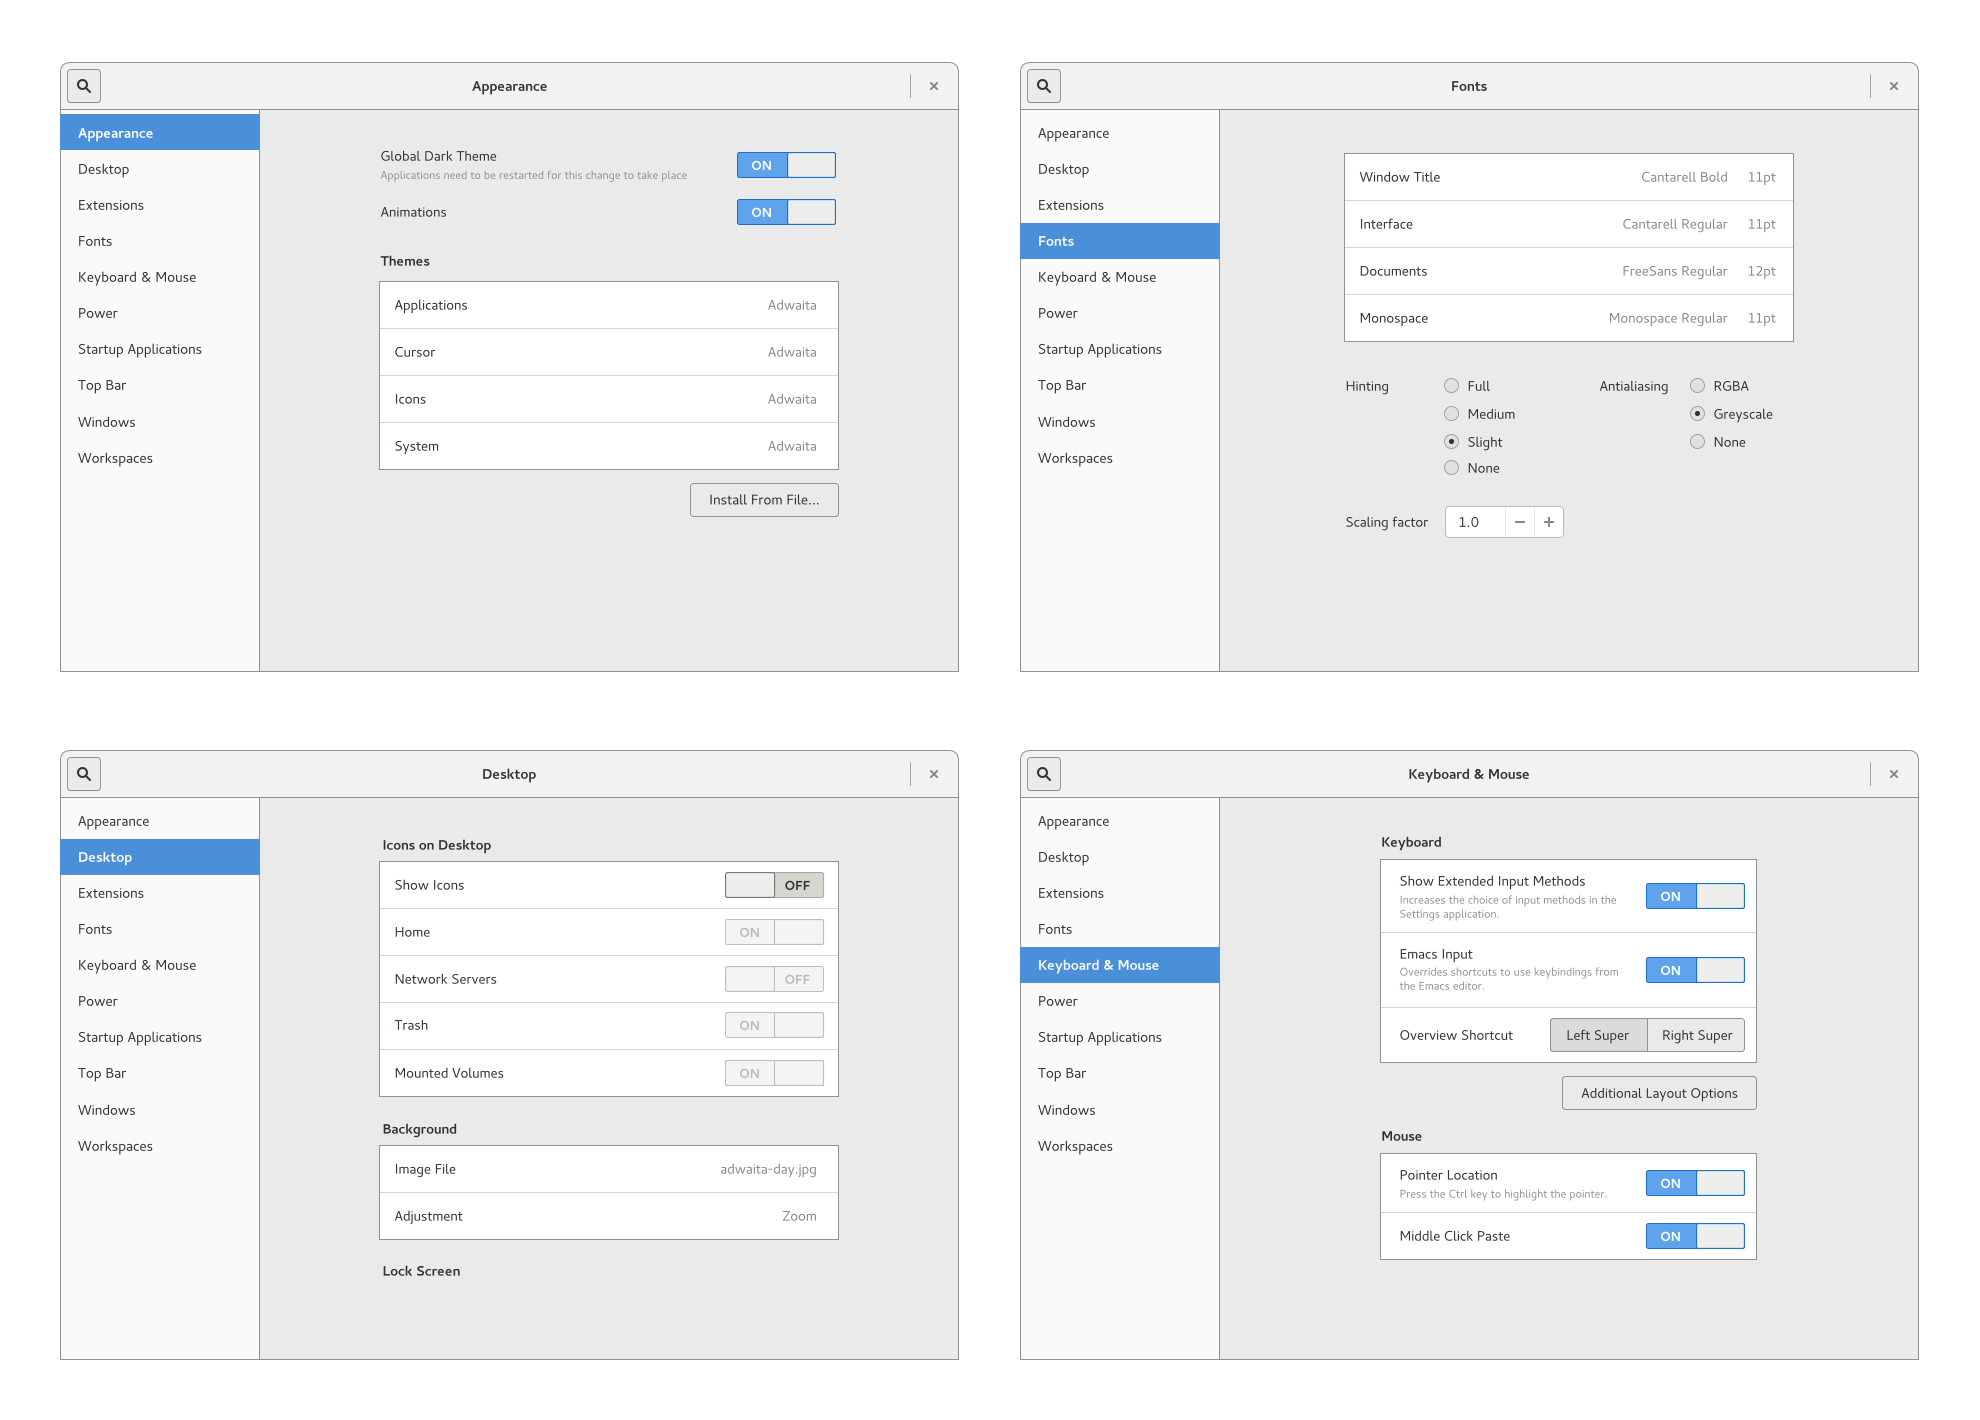 Open to view the full wireframes